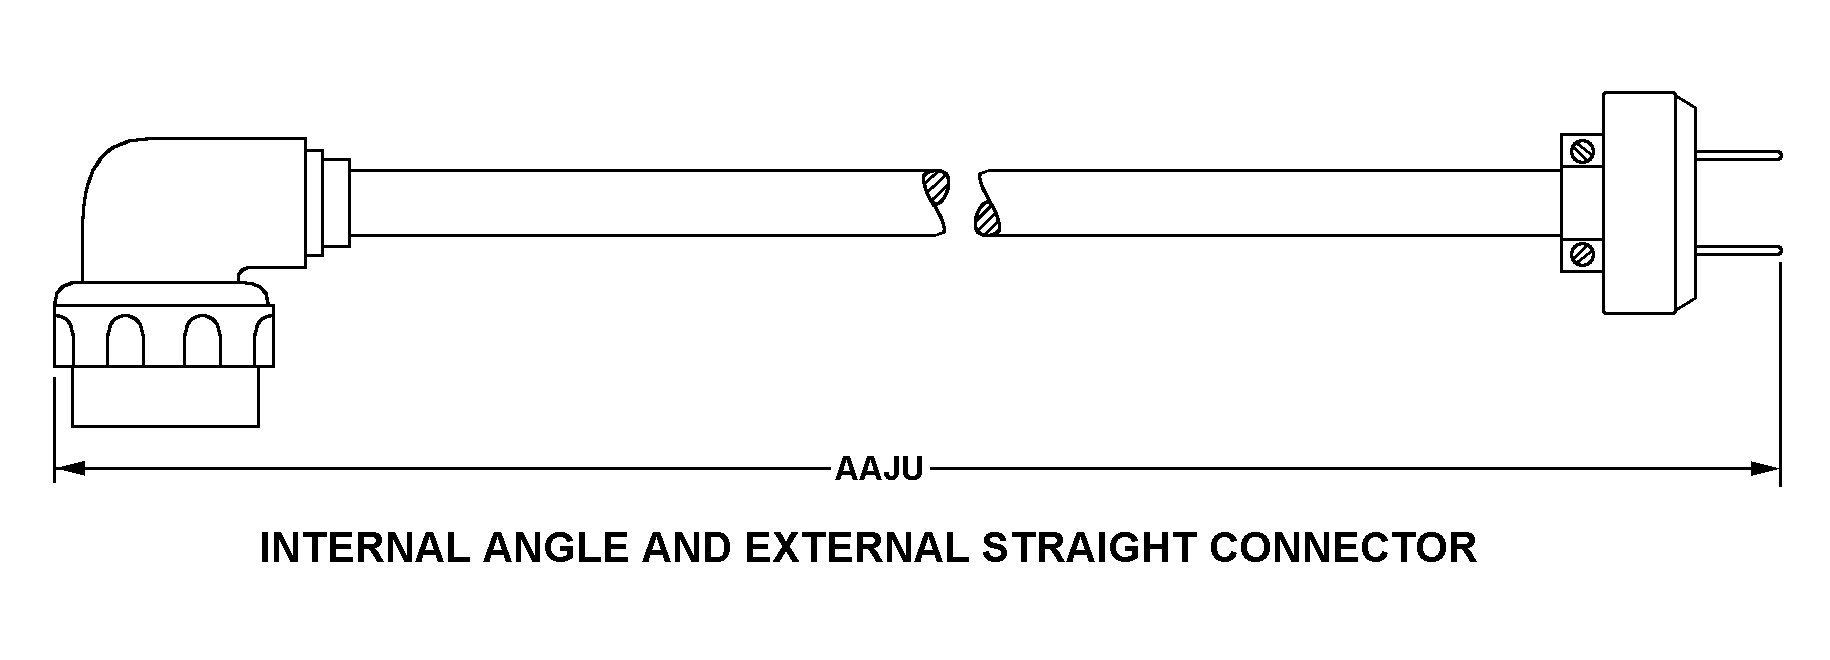 INTERNAL ANGLE AND EXTERNAL STRAIGHT CONNECTOR style nsn 6150-01-270-3254